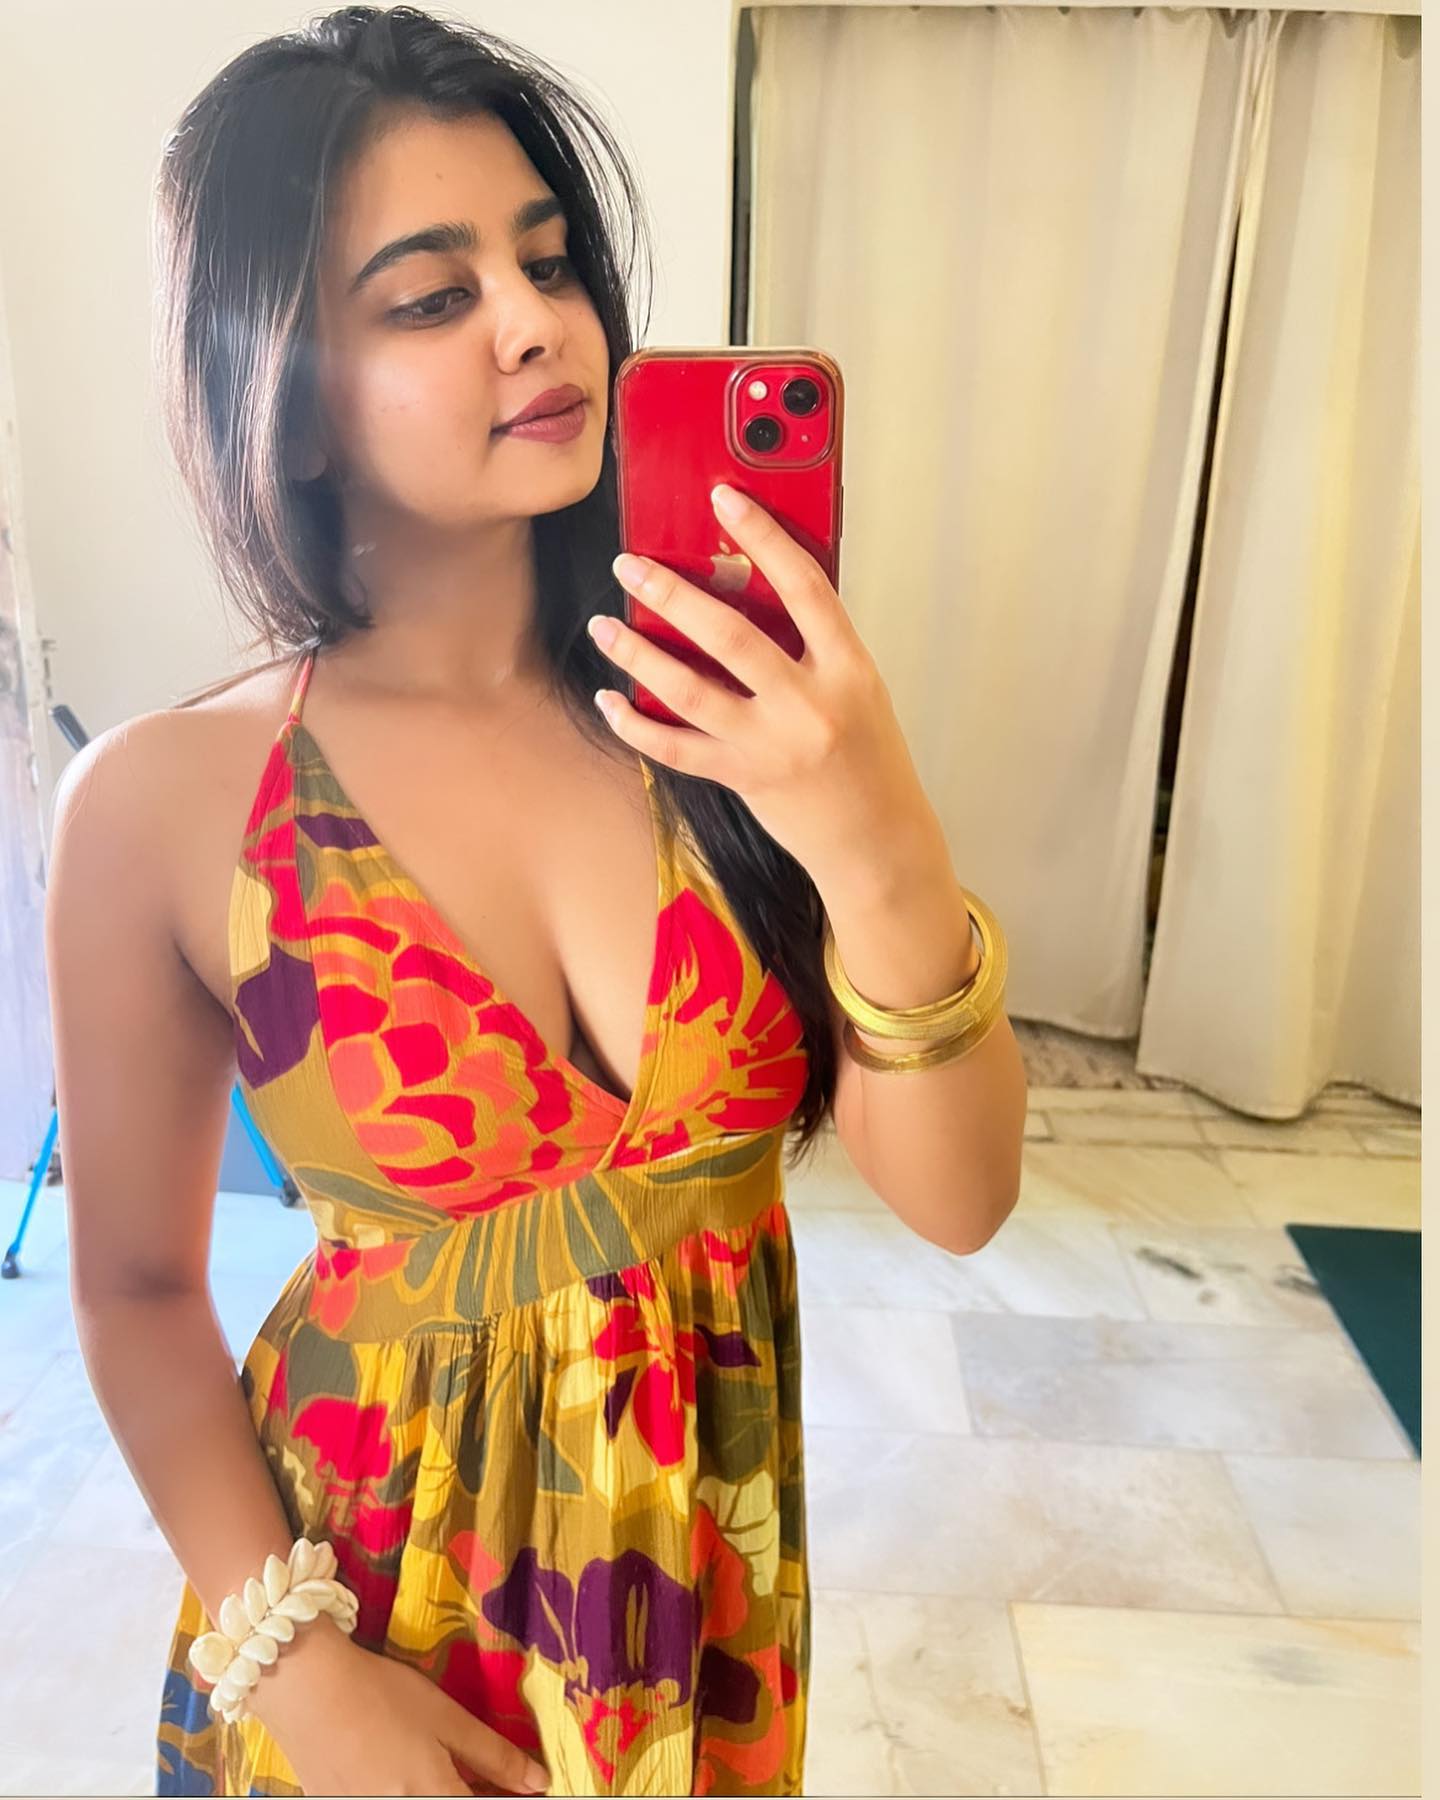 Indore Low price CASH PAYMENT Hot Sexy latest Genuine College Girl Es